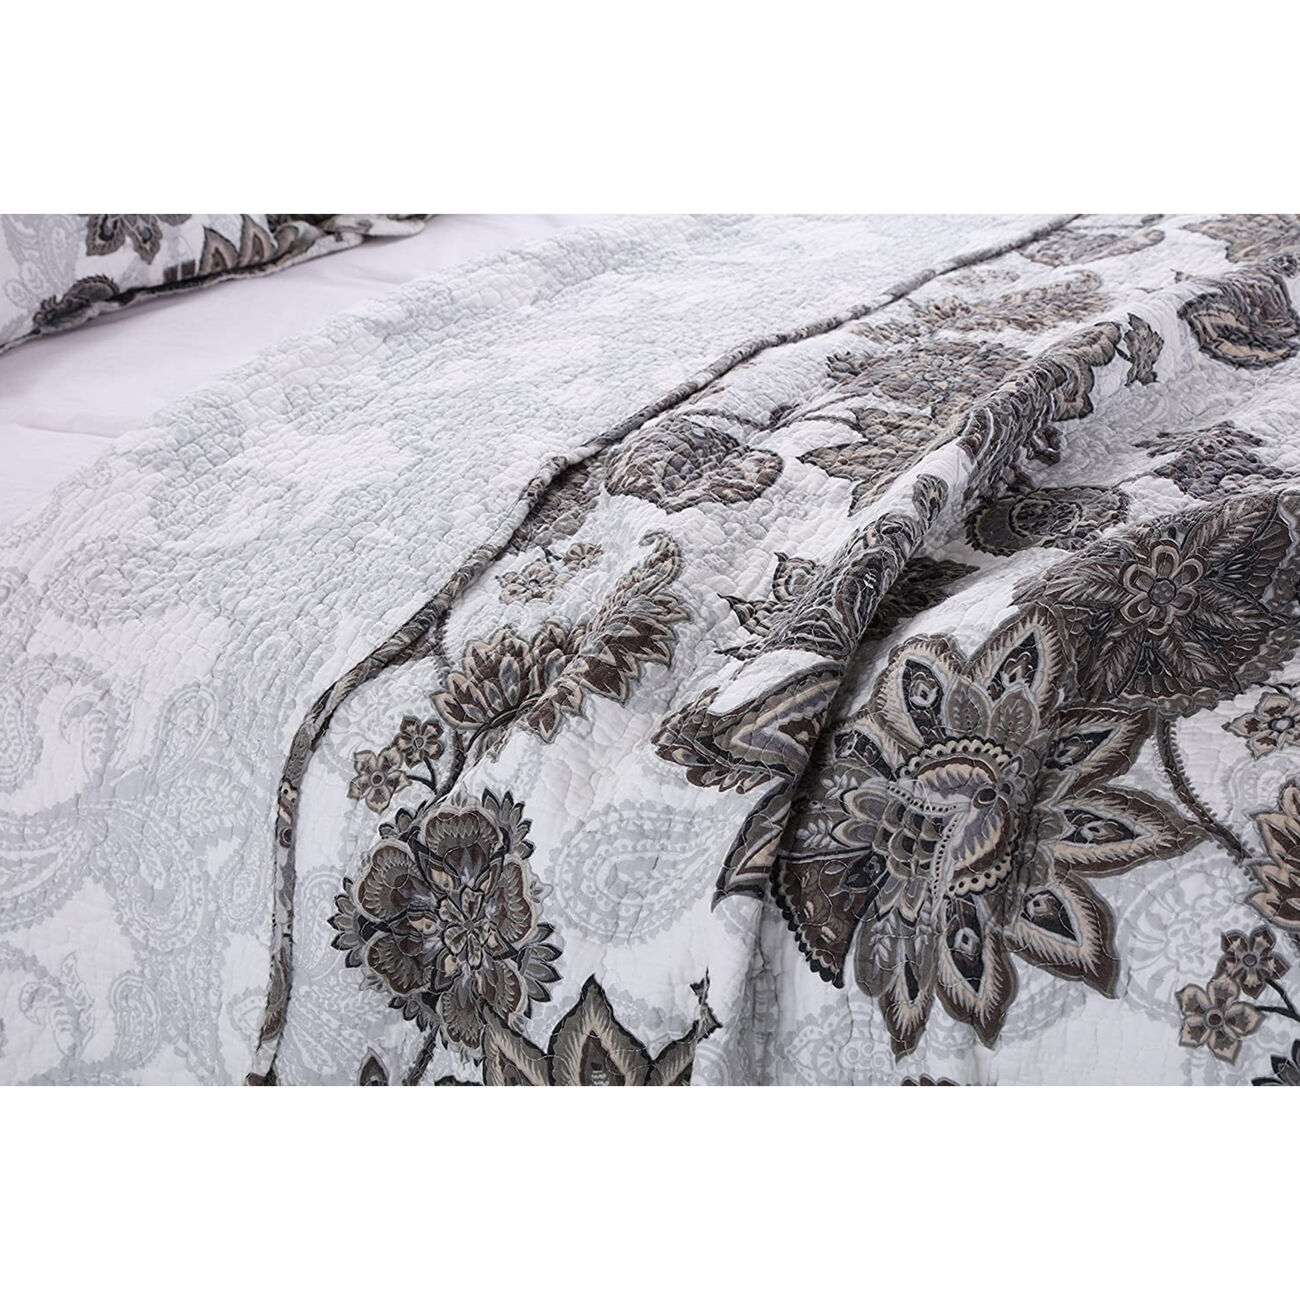 Tagus 2 Piece Fabric Twin Quilt Set with Floral and Paisley Print, White and Gray